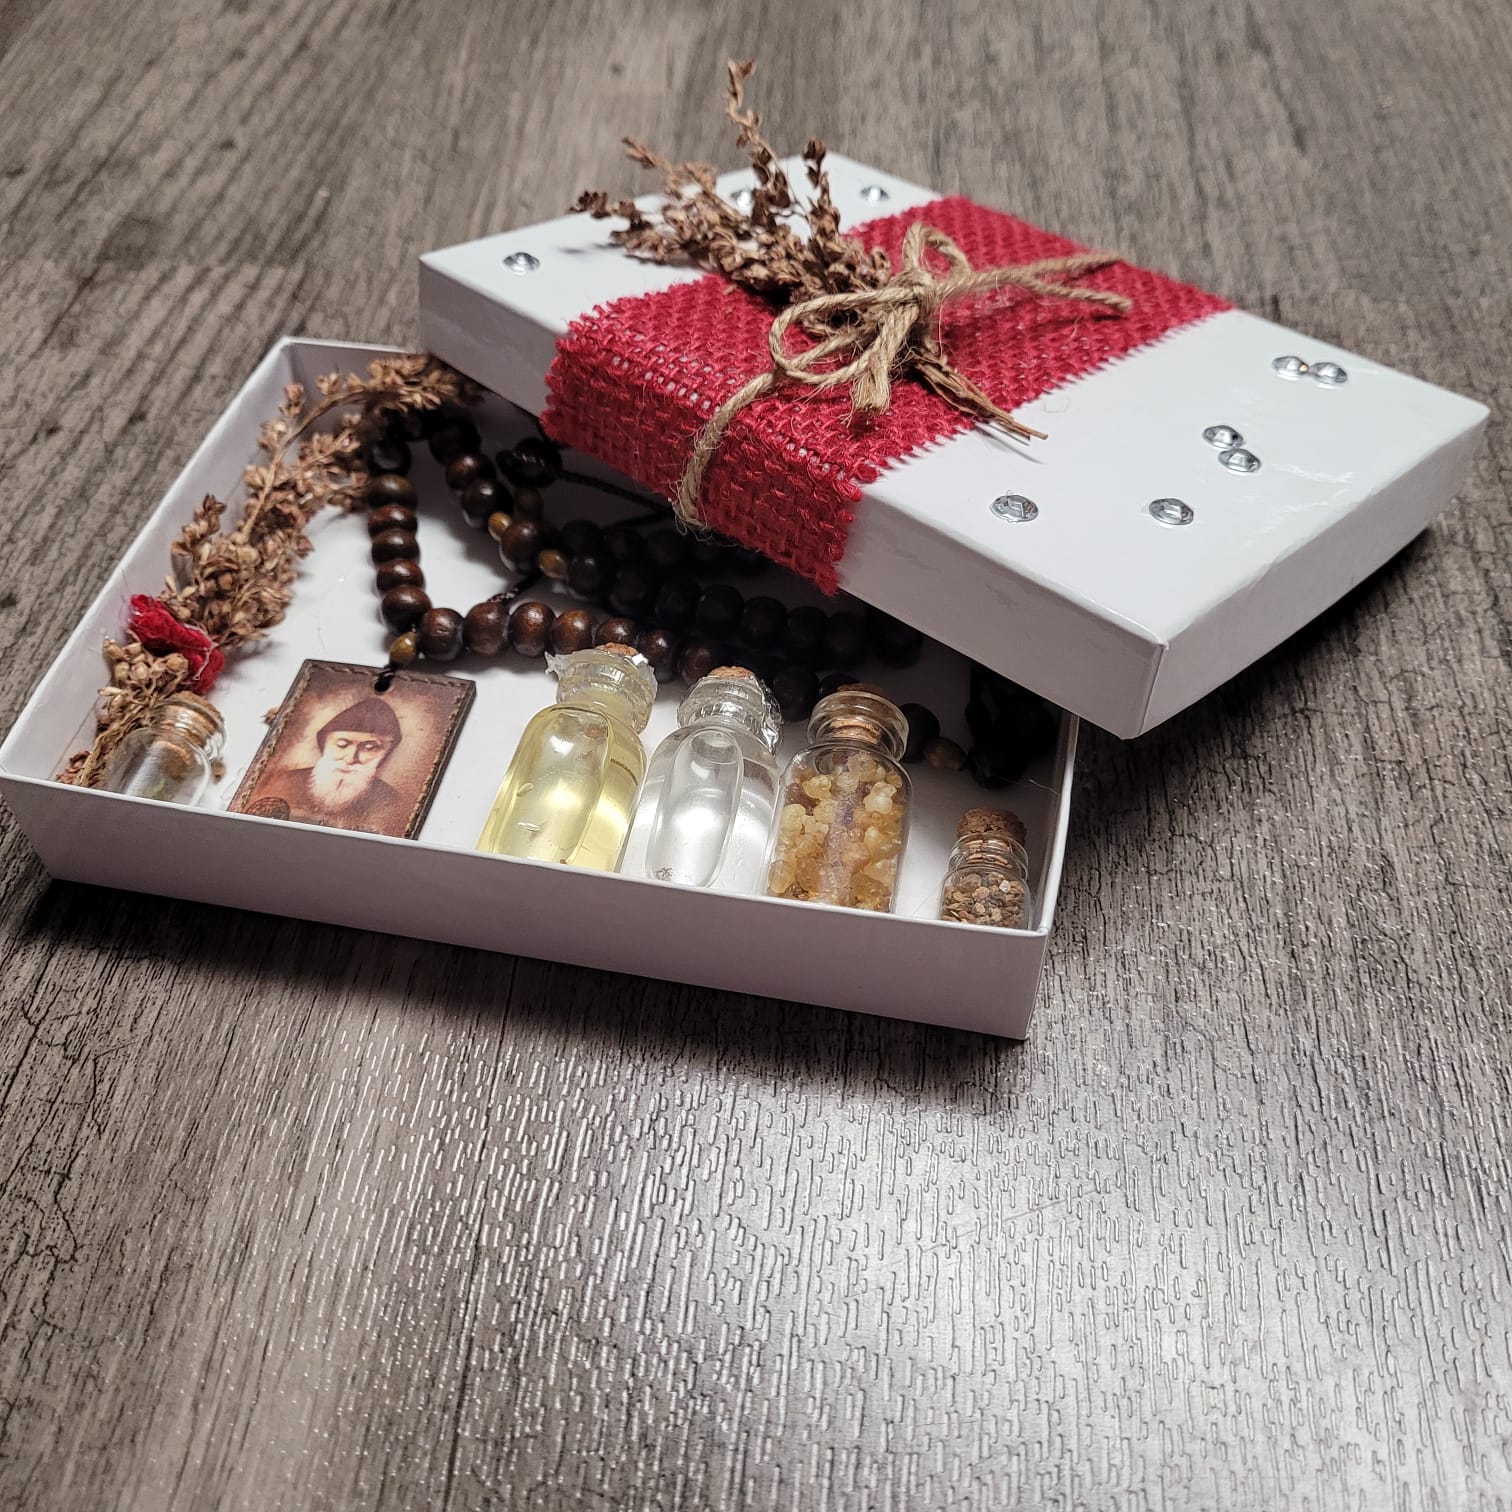 Saint Charbel Gift Box - Our Lady of Gifts 